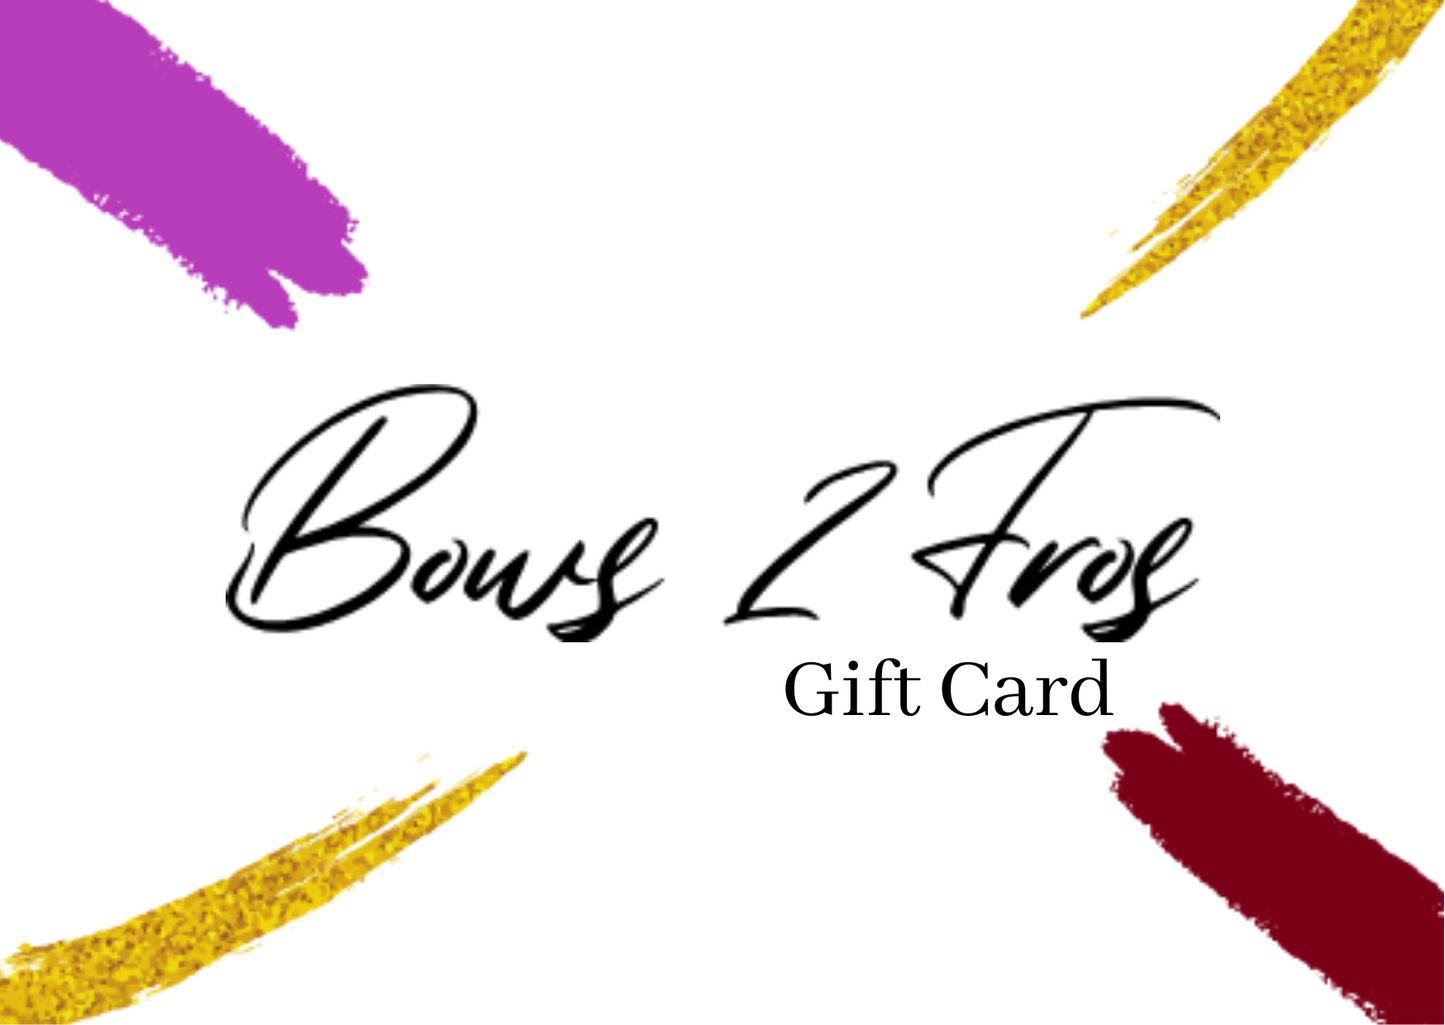 Bows 2 Fros Gift Card